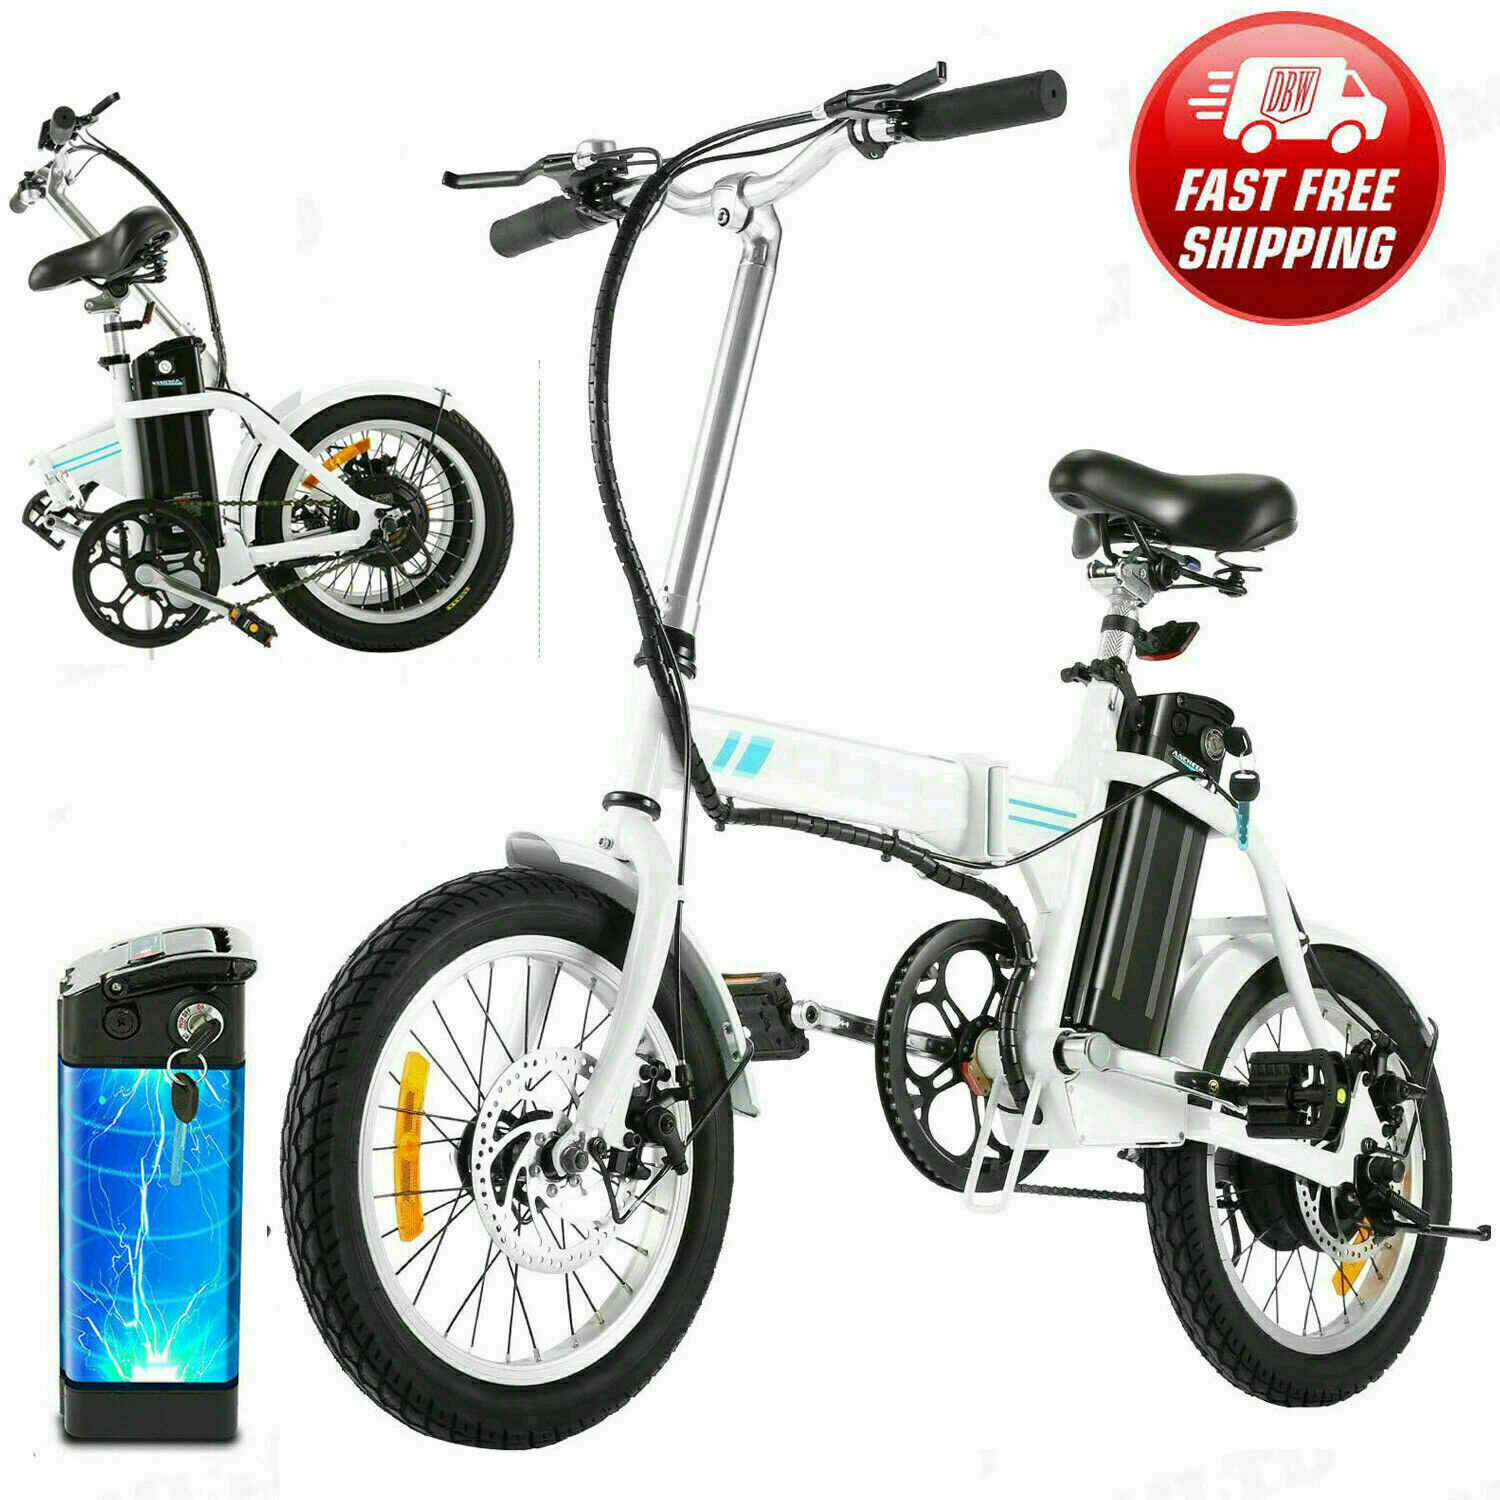 Electric Bicycle for Sale: 16 Folding Electric Commuter Bike,City Ebike 8Ah Removable Lithium-Ion B 46 in Hacienda Heights, California